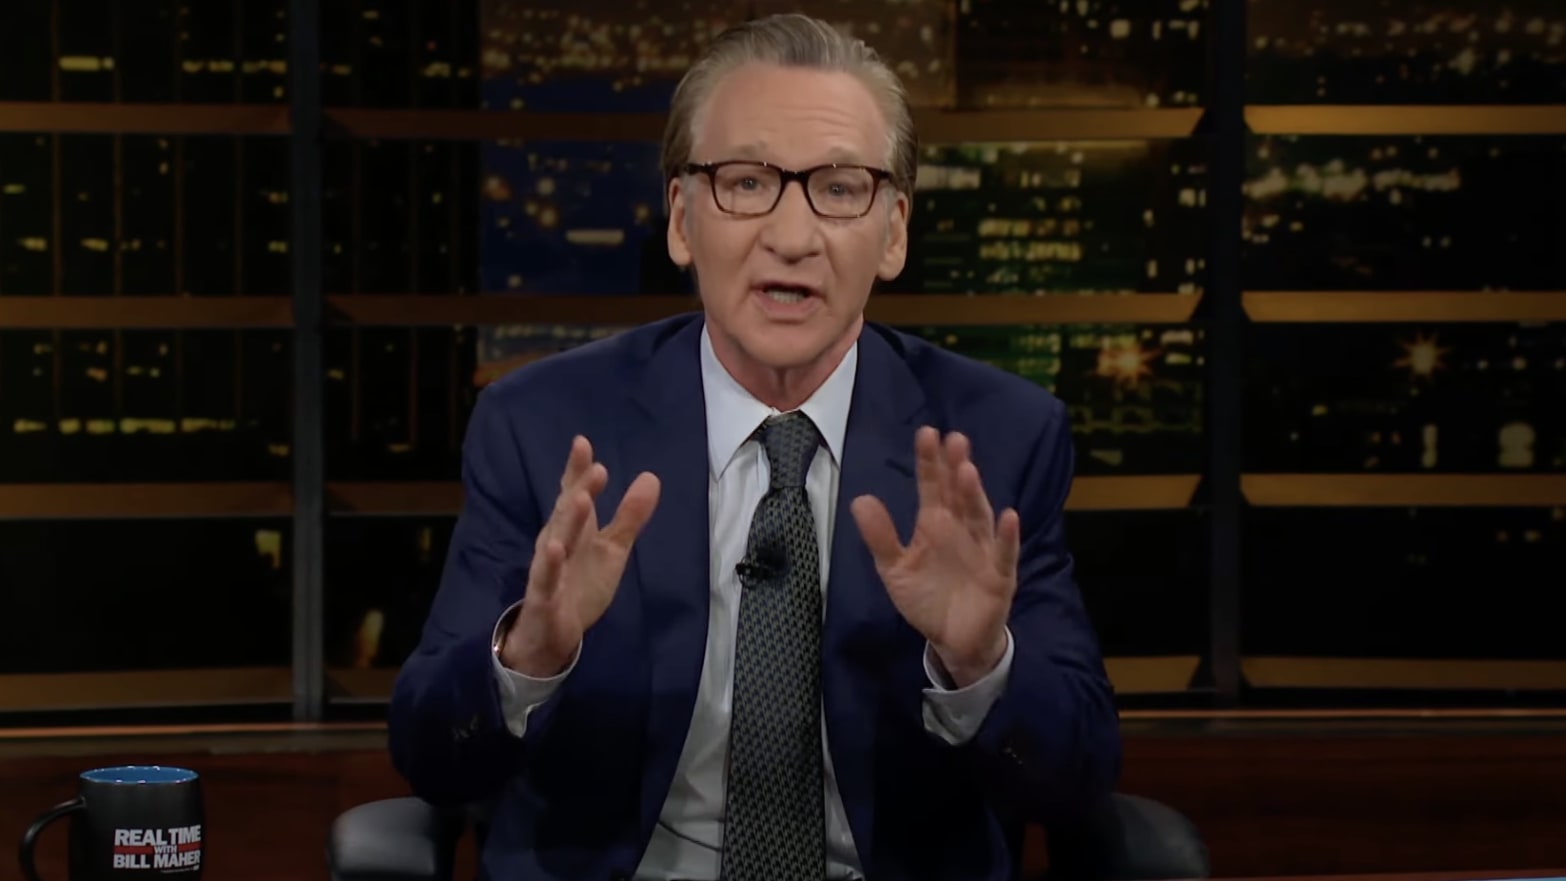 Bill Maher Exposes Elite Colleges: “Harvard Makes Students Stupid”